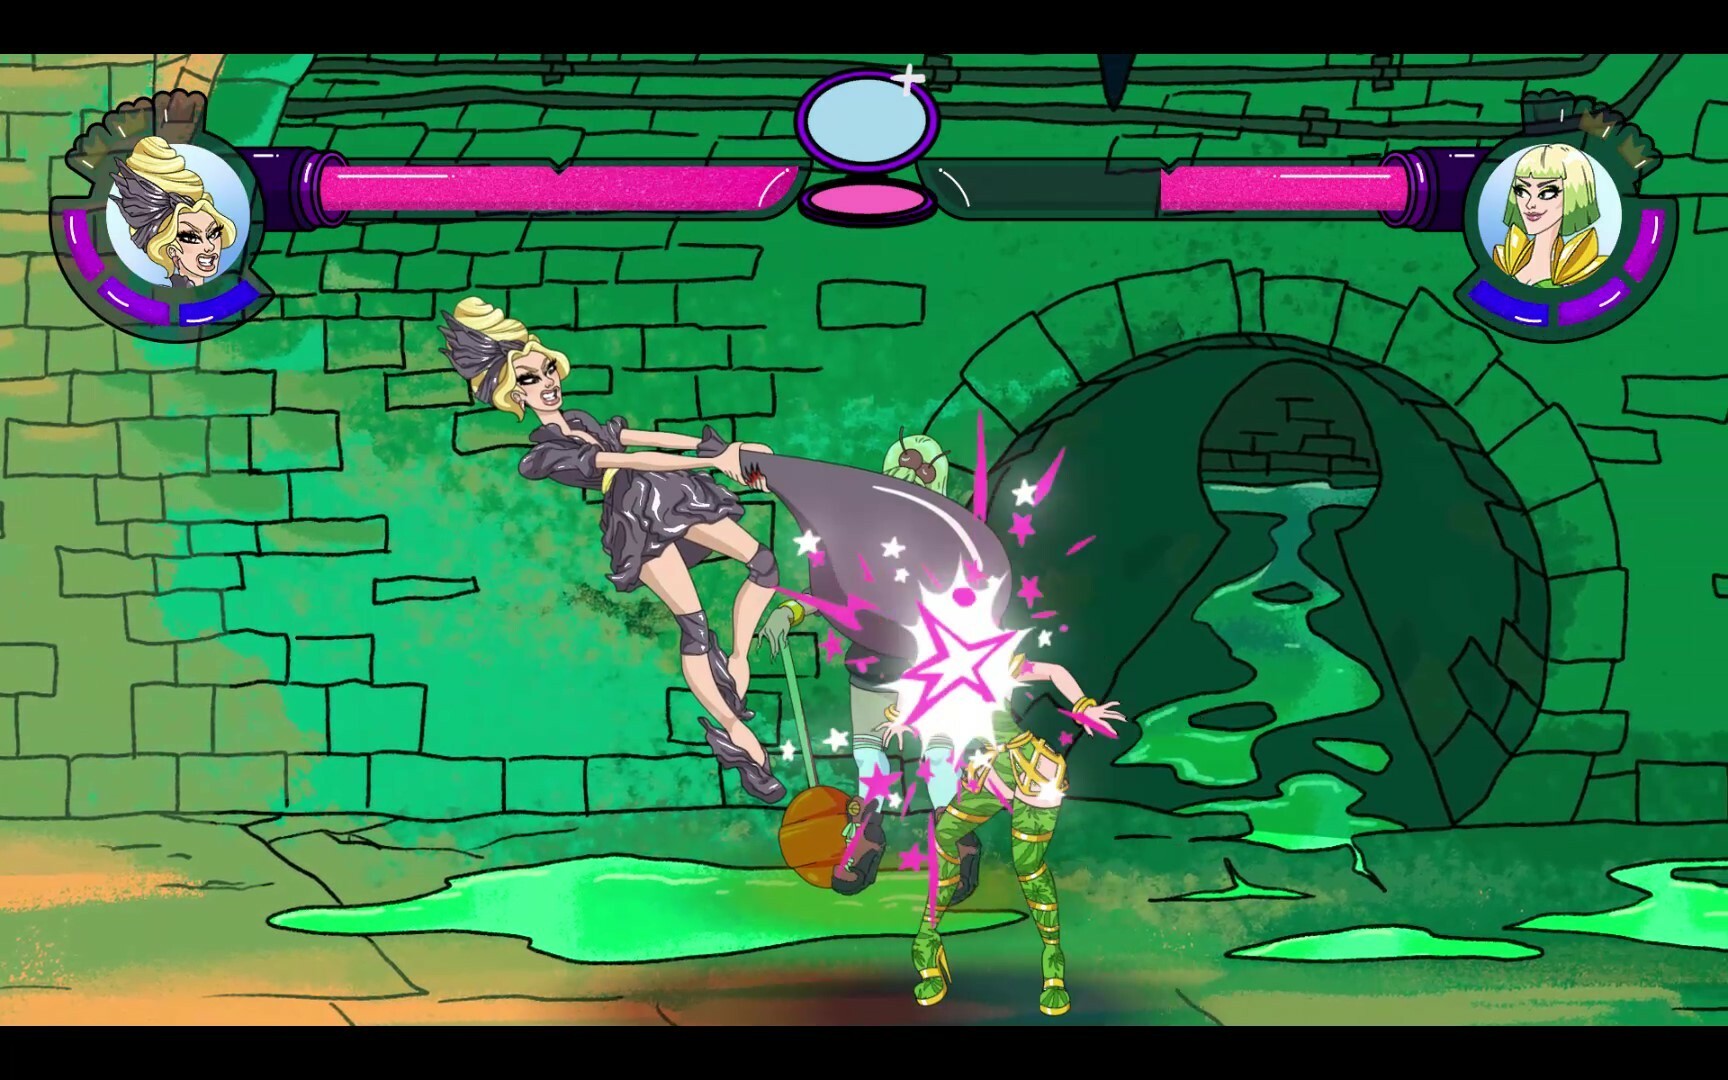 A screenshot from Drag Her! In a green-tinted, bricked sewer, Alaska 5000 is wearing a black garbage bag dress while jumping up and hitting Laganja Estranja (donning a green cannabis leaf print) with a garbage bag.